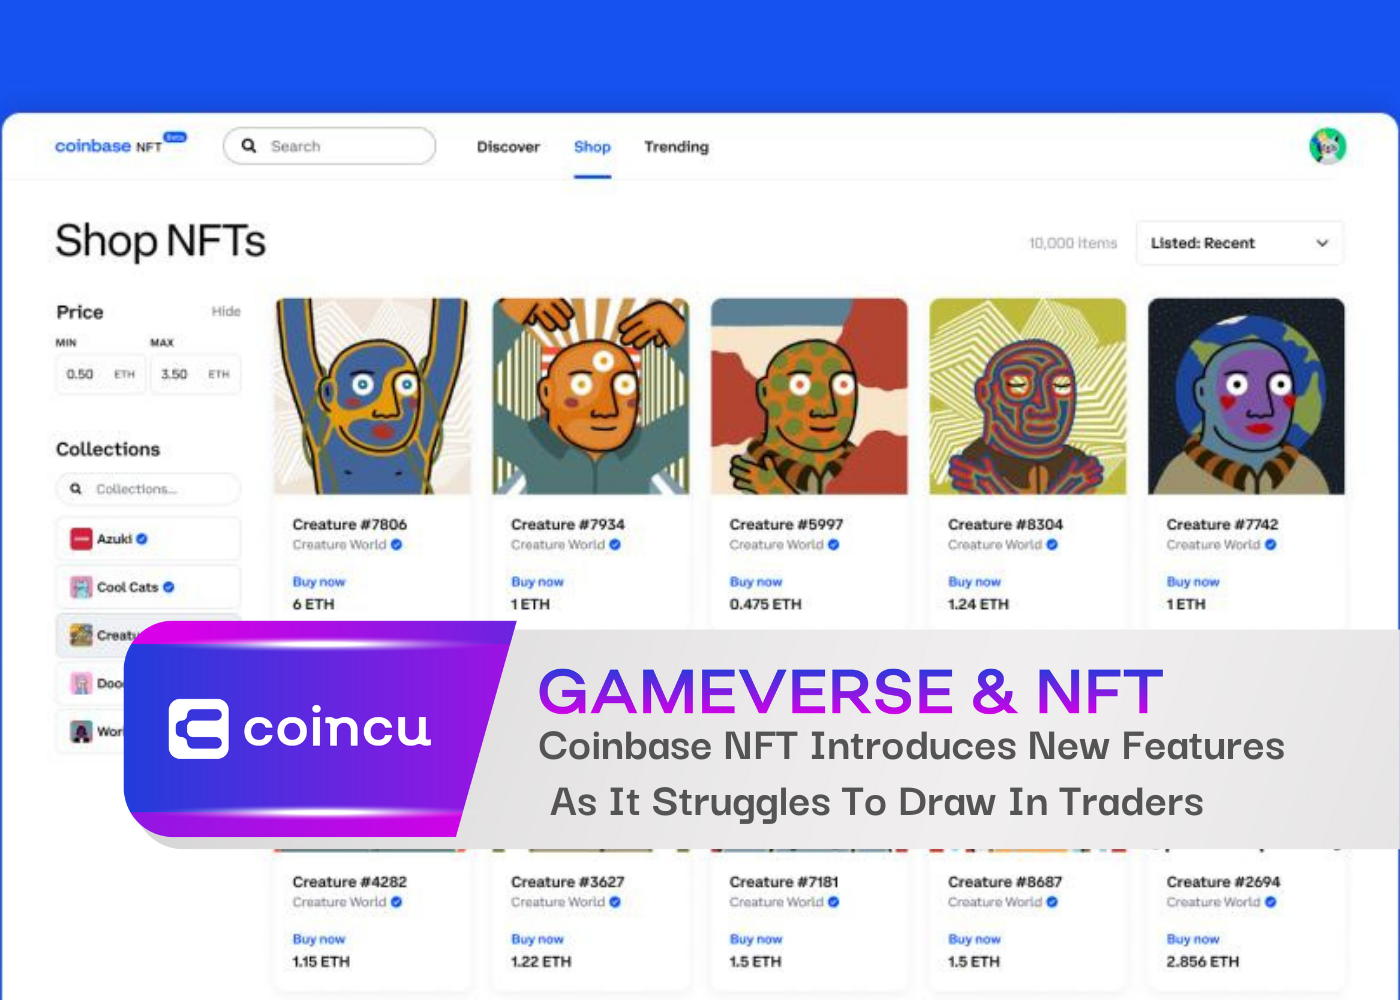 Coinbase NFT Introduces New Features